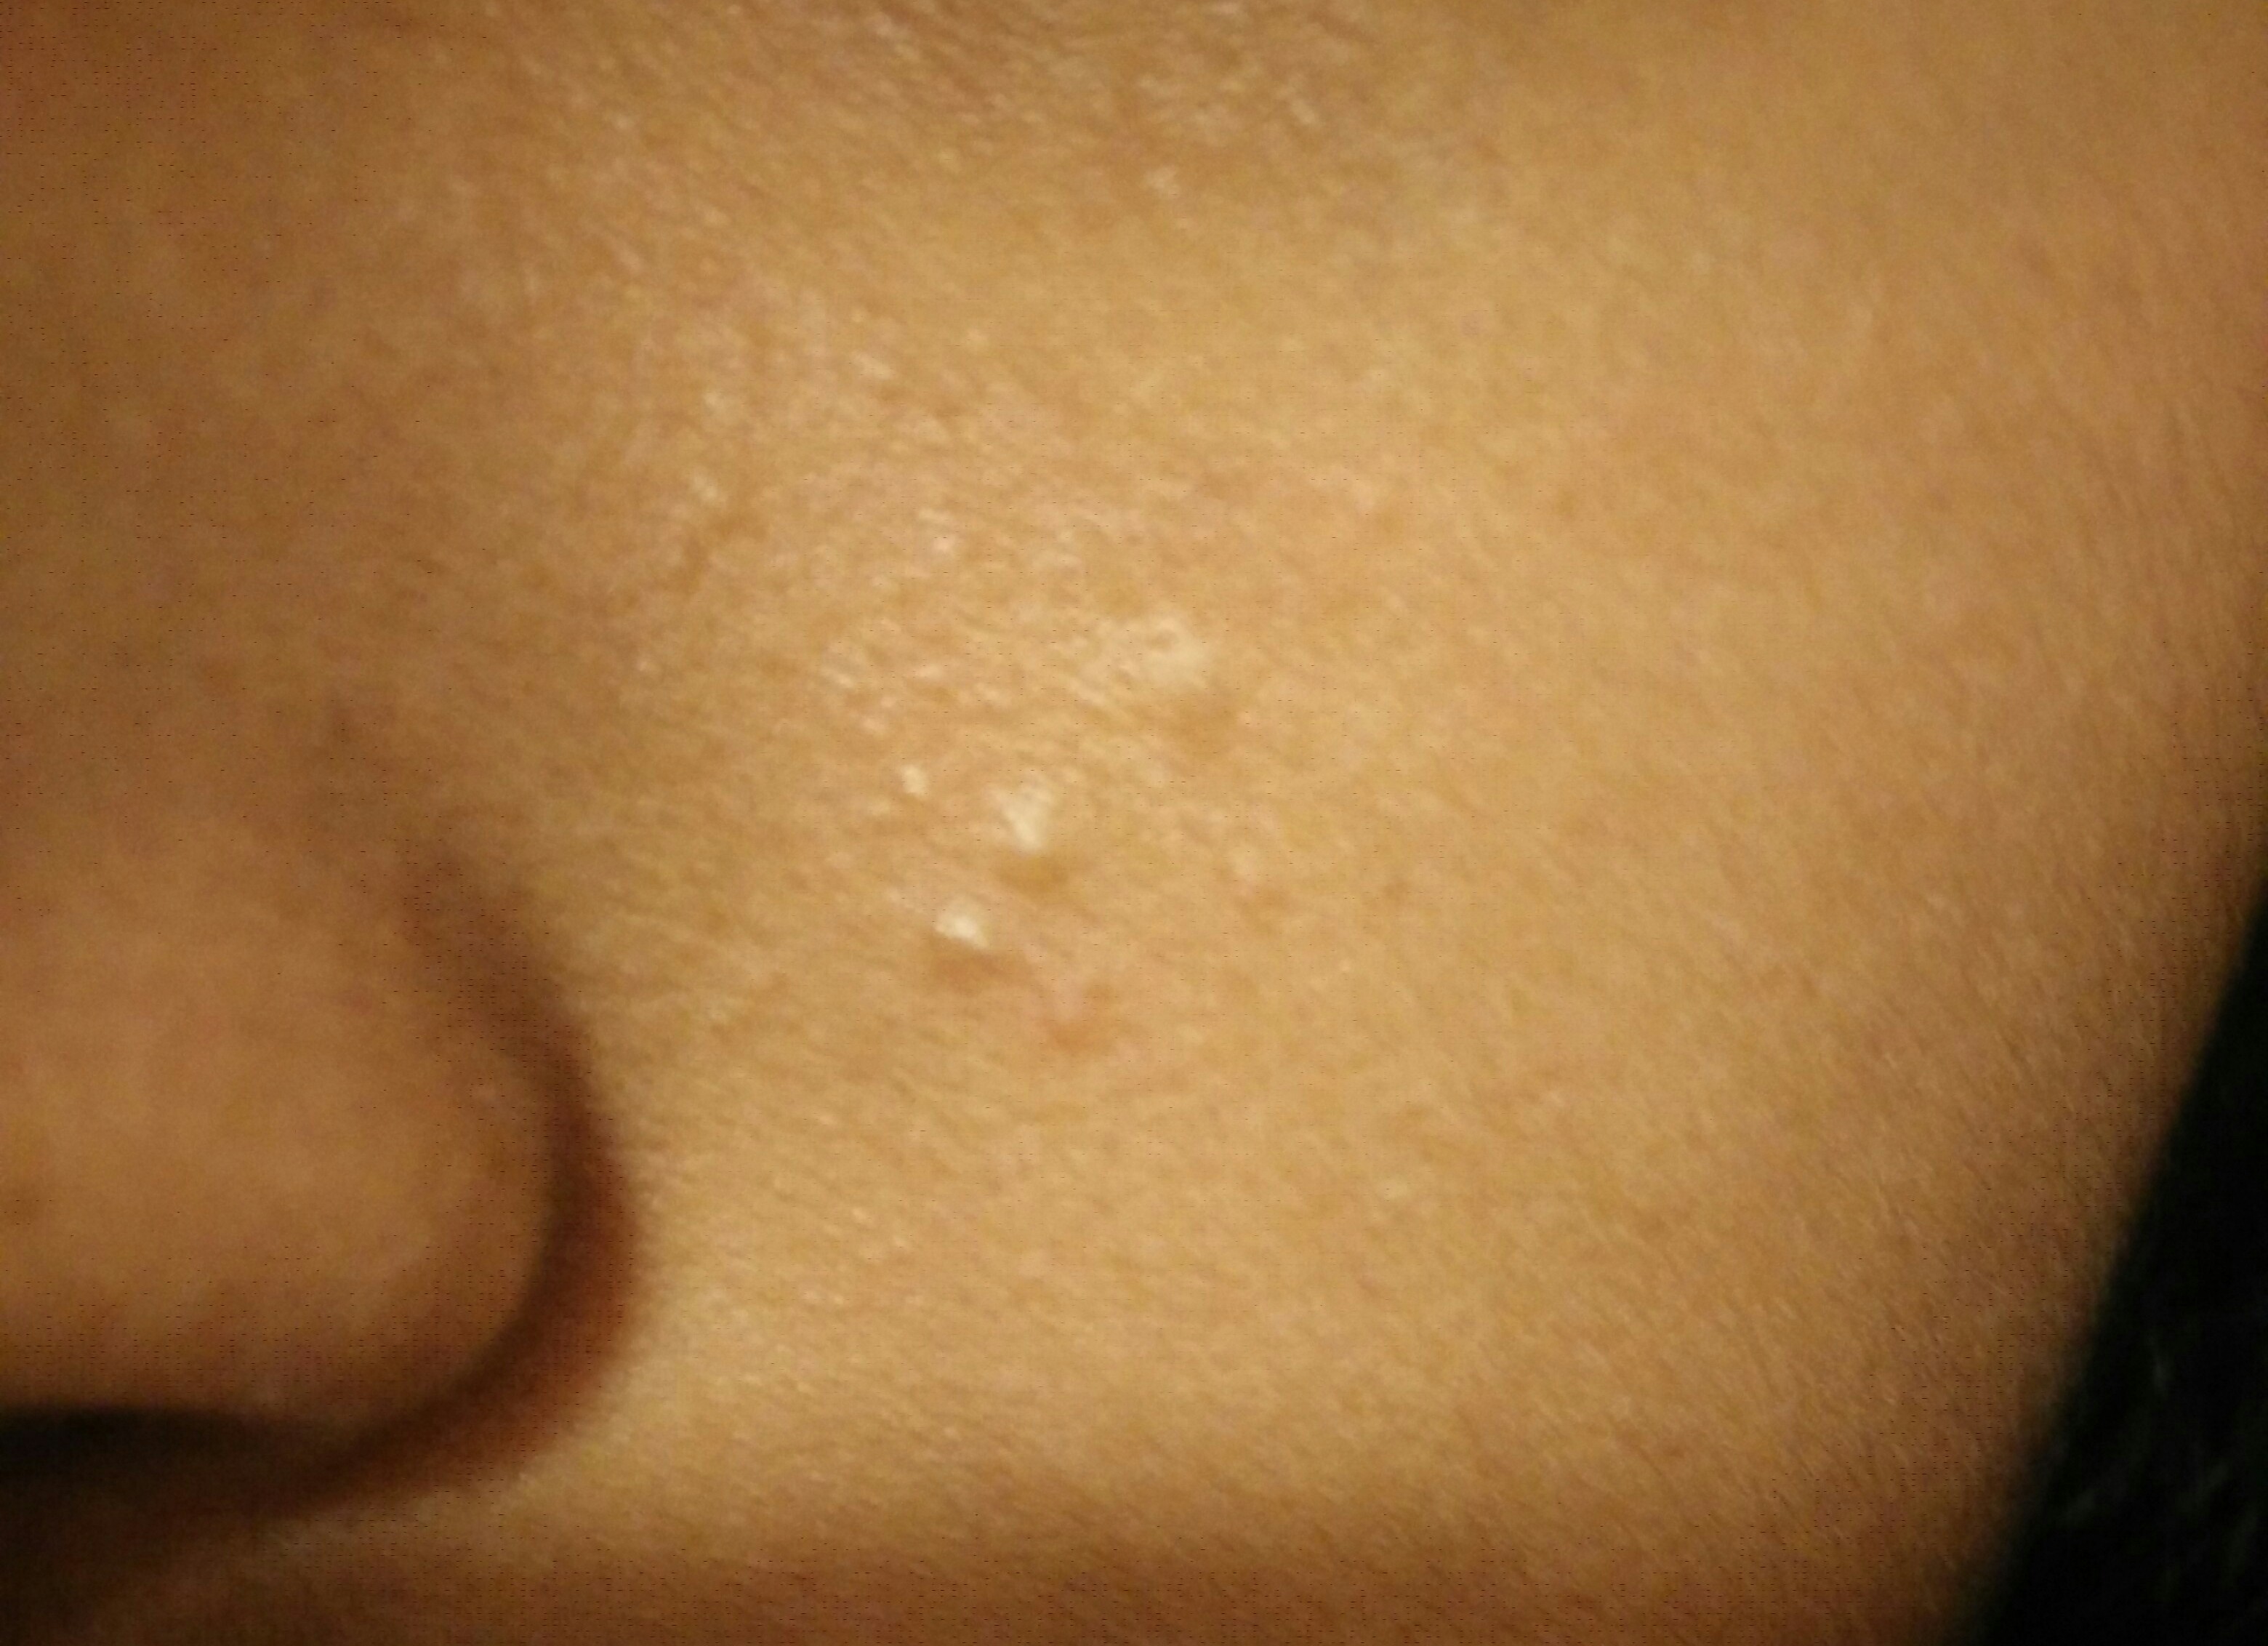 Small Bumps That Arent Pimples On Face General Acne Discussion